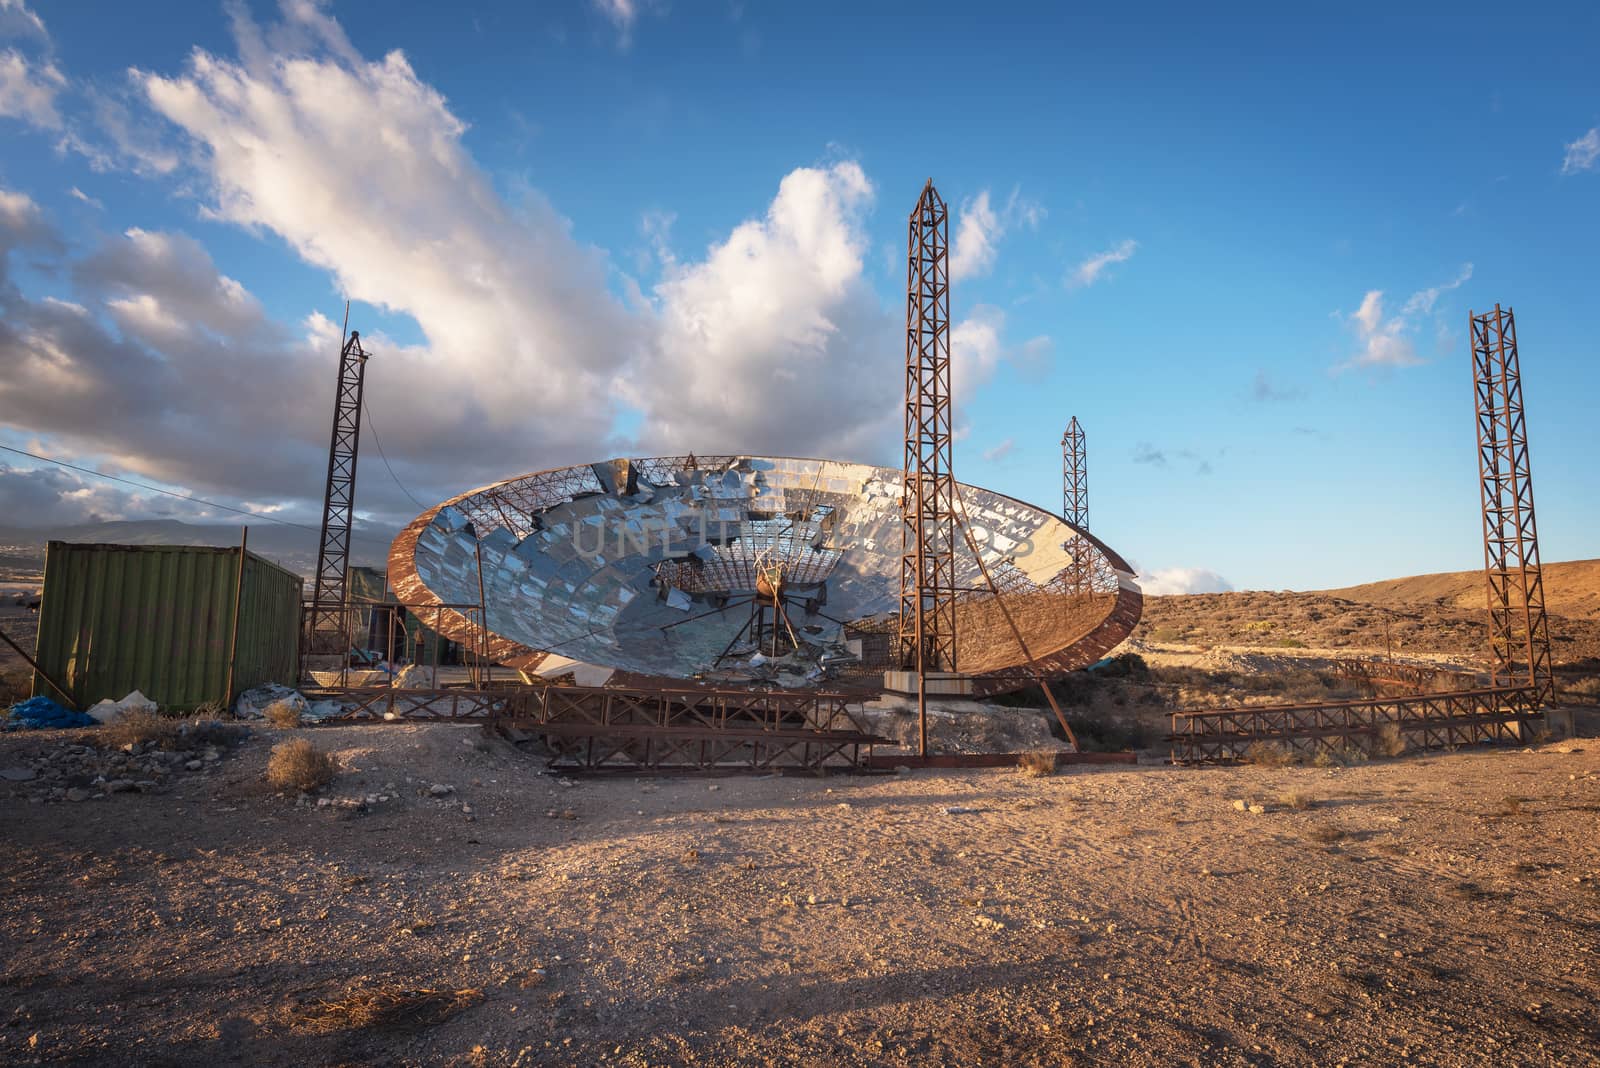 Ruined setellite dish antenna in south Tenerife, Canary islands, Spain.